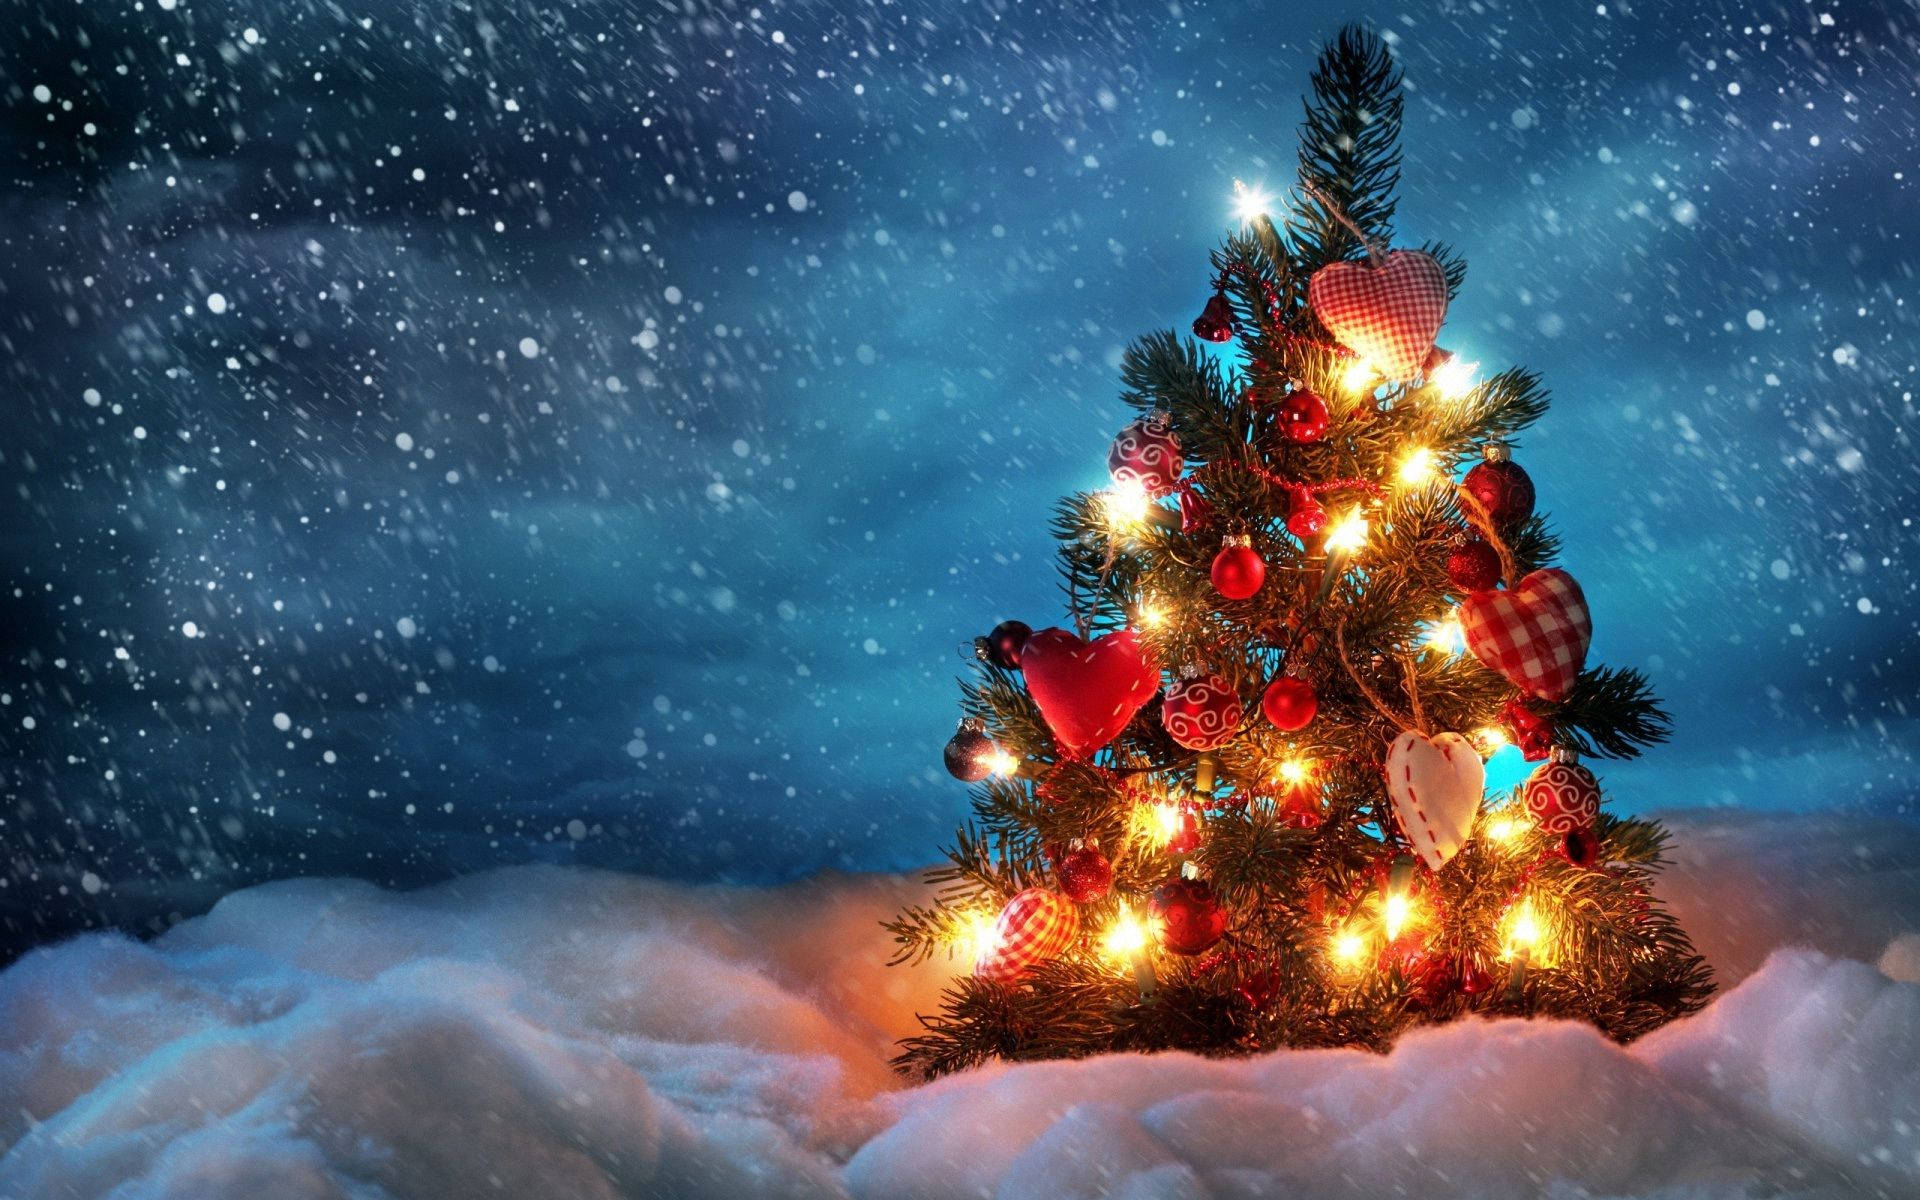 Download Small Christmas Tree On Snowy Night Wallpaper